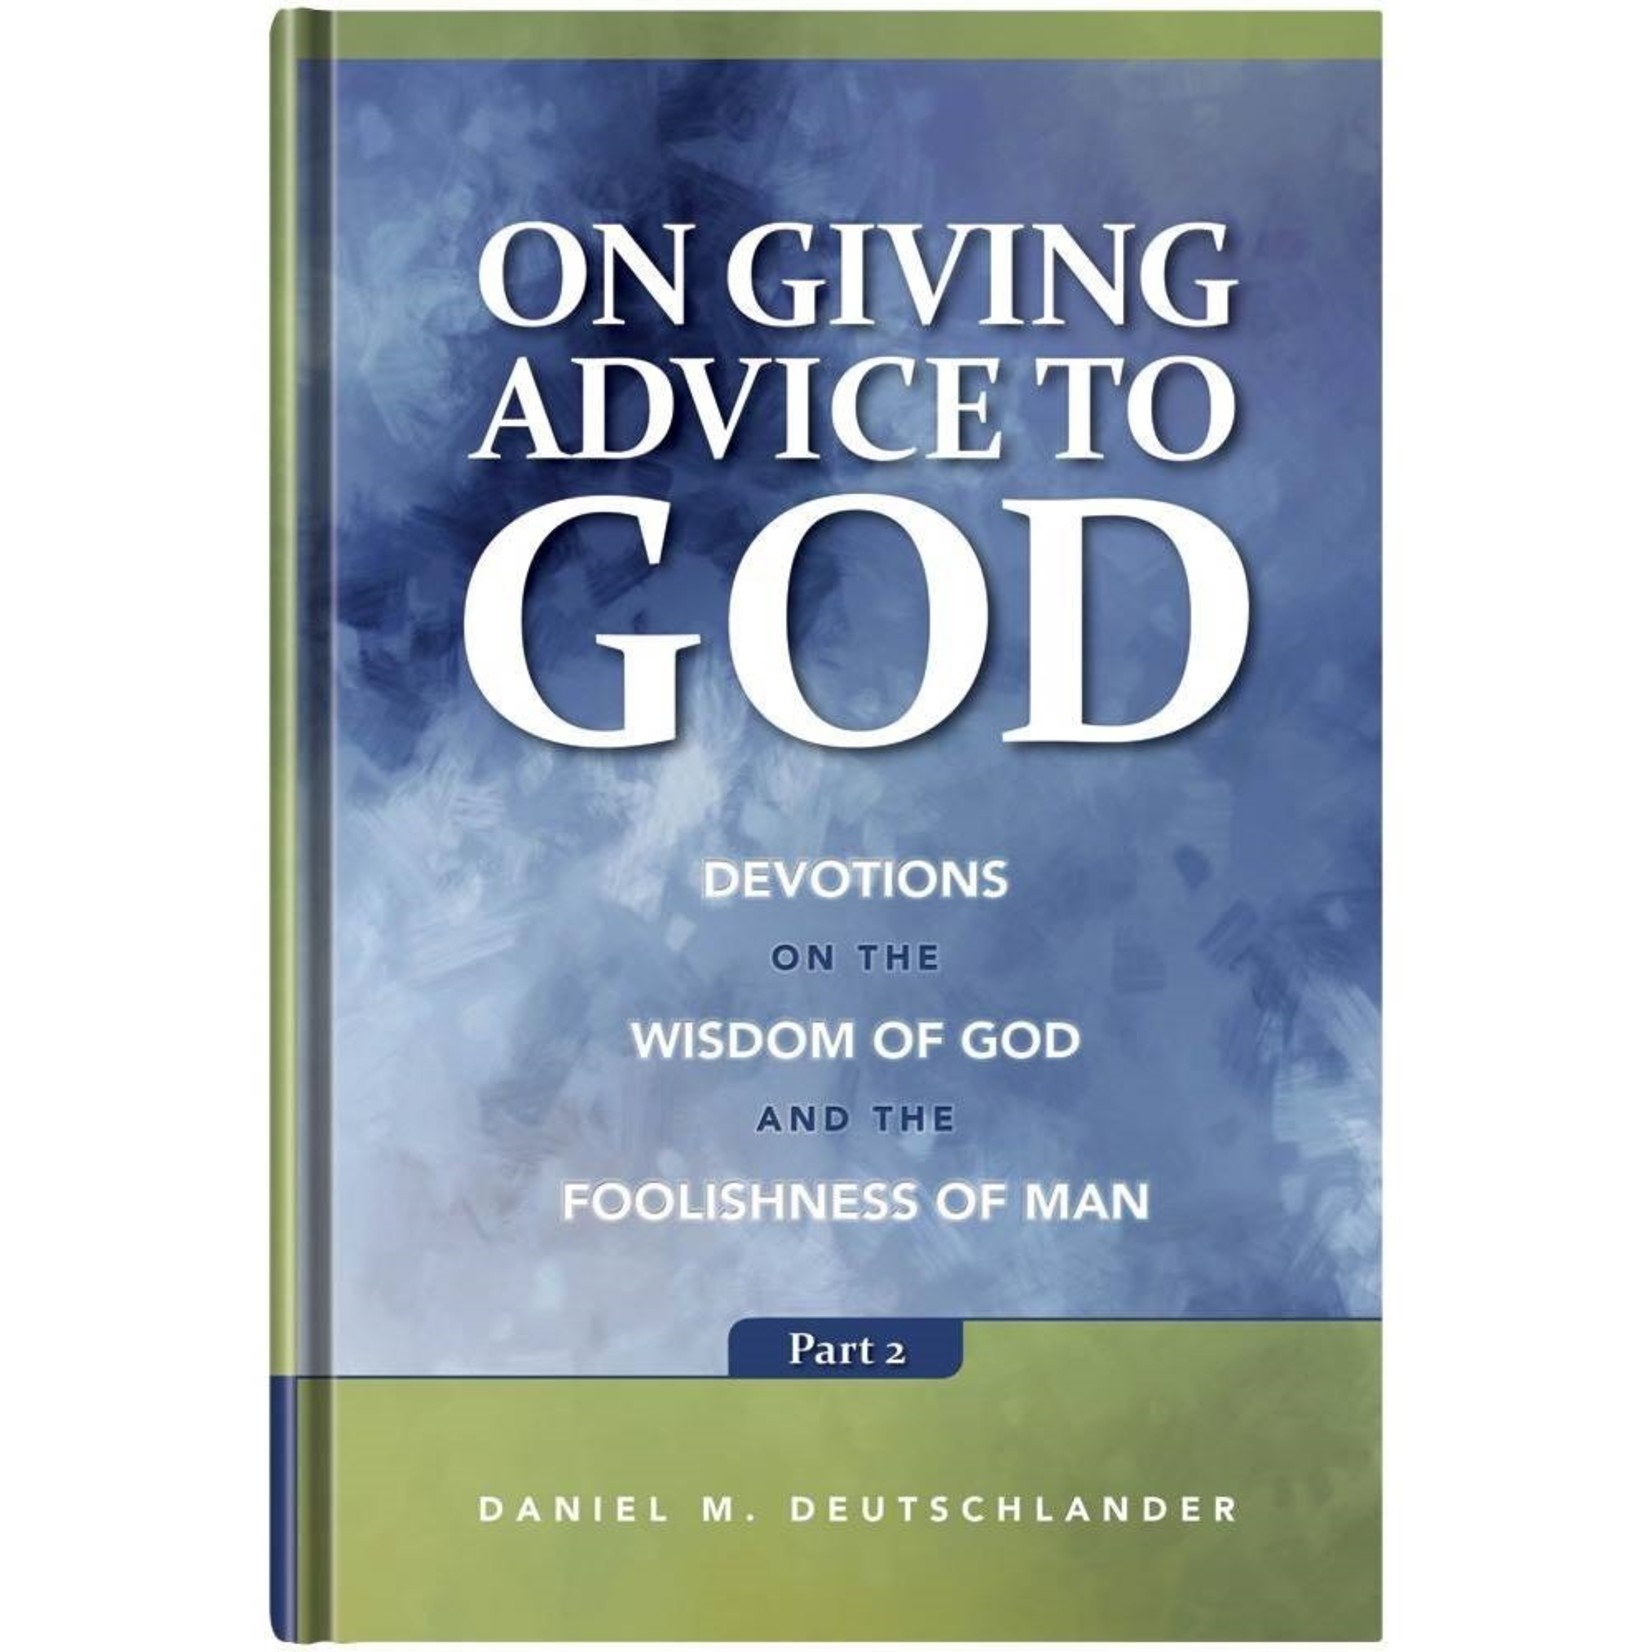 On Giving Advice to God - Part II- Devotions on the Wisdom of God and the Foolishness of Man